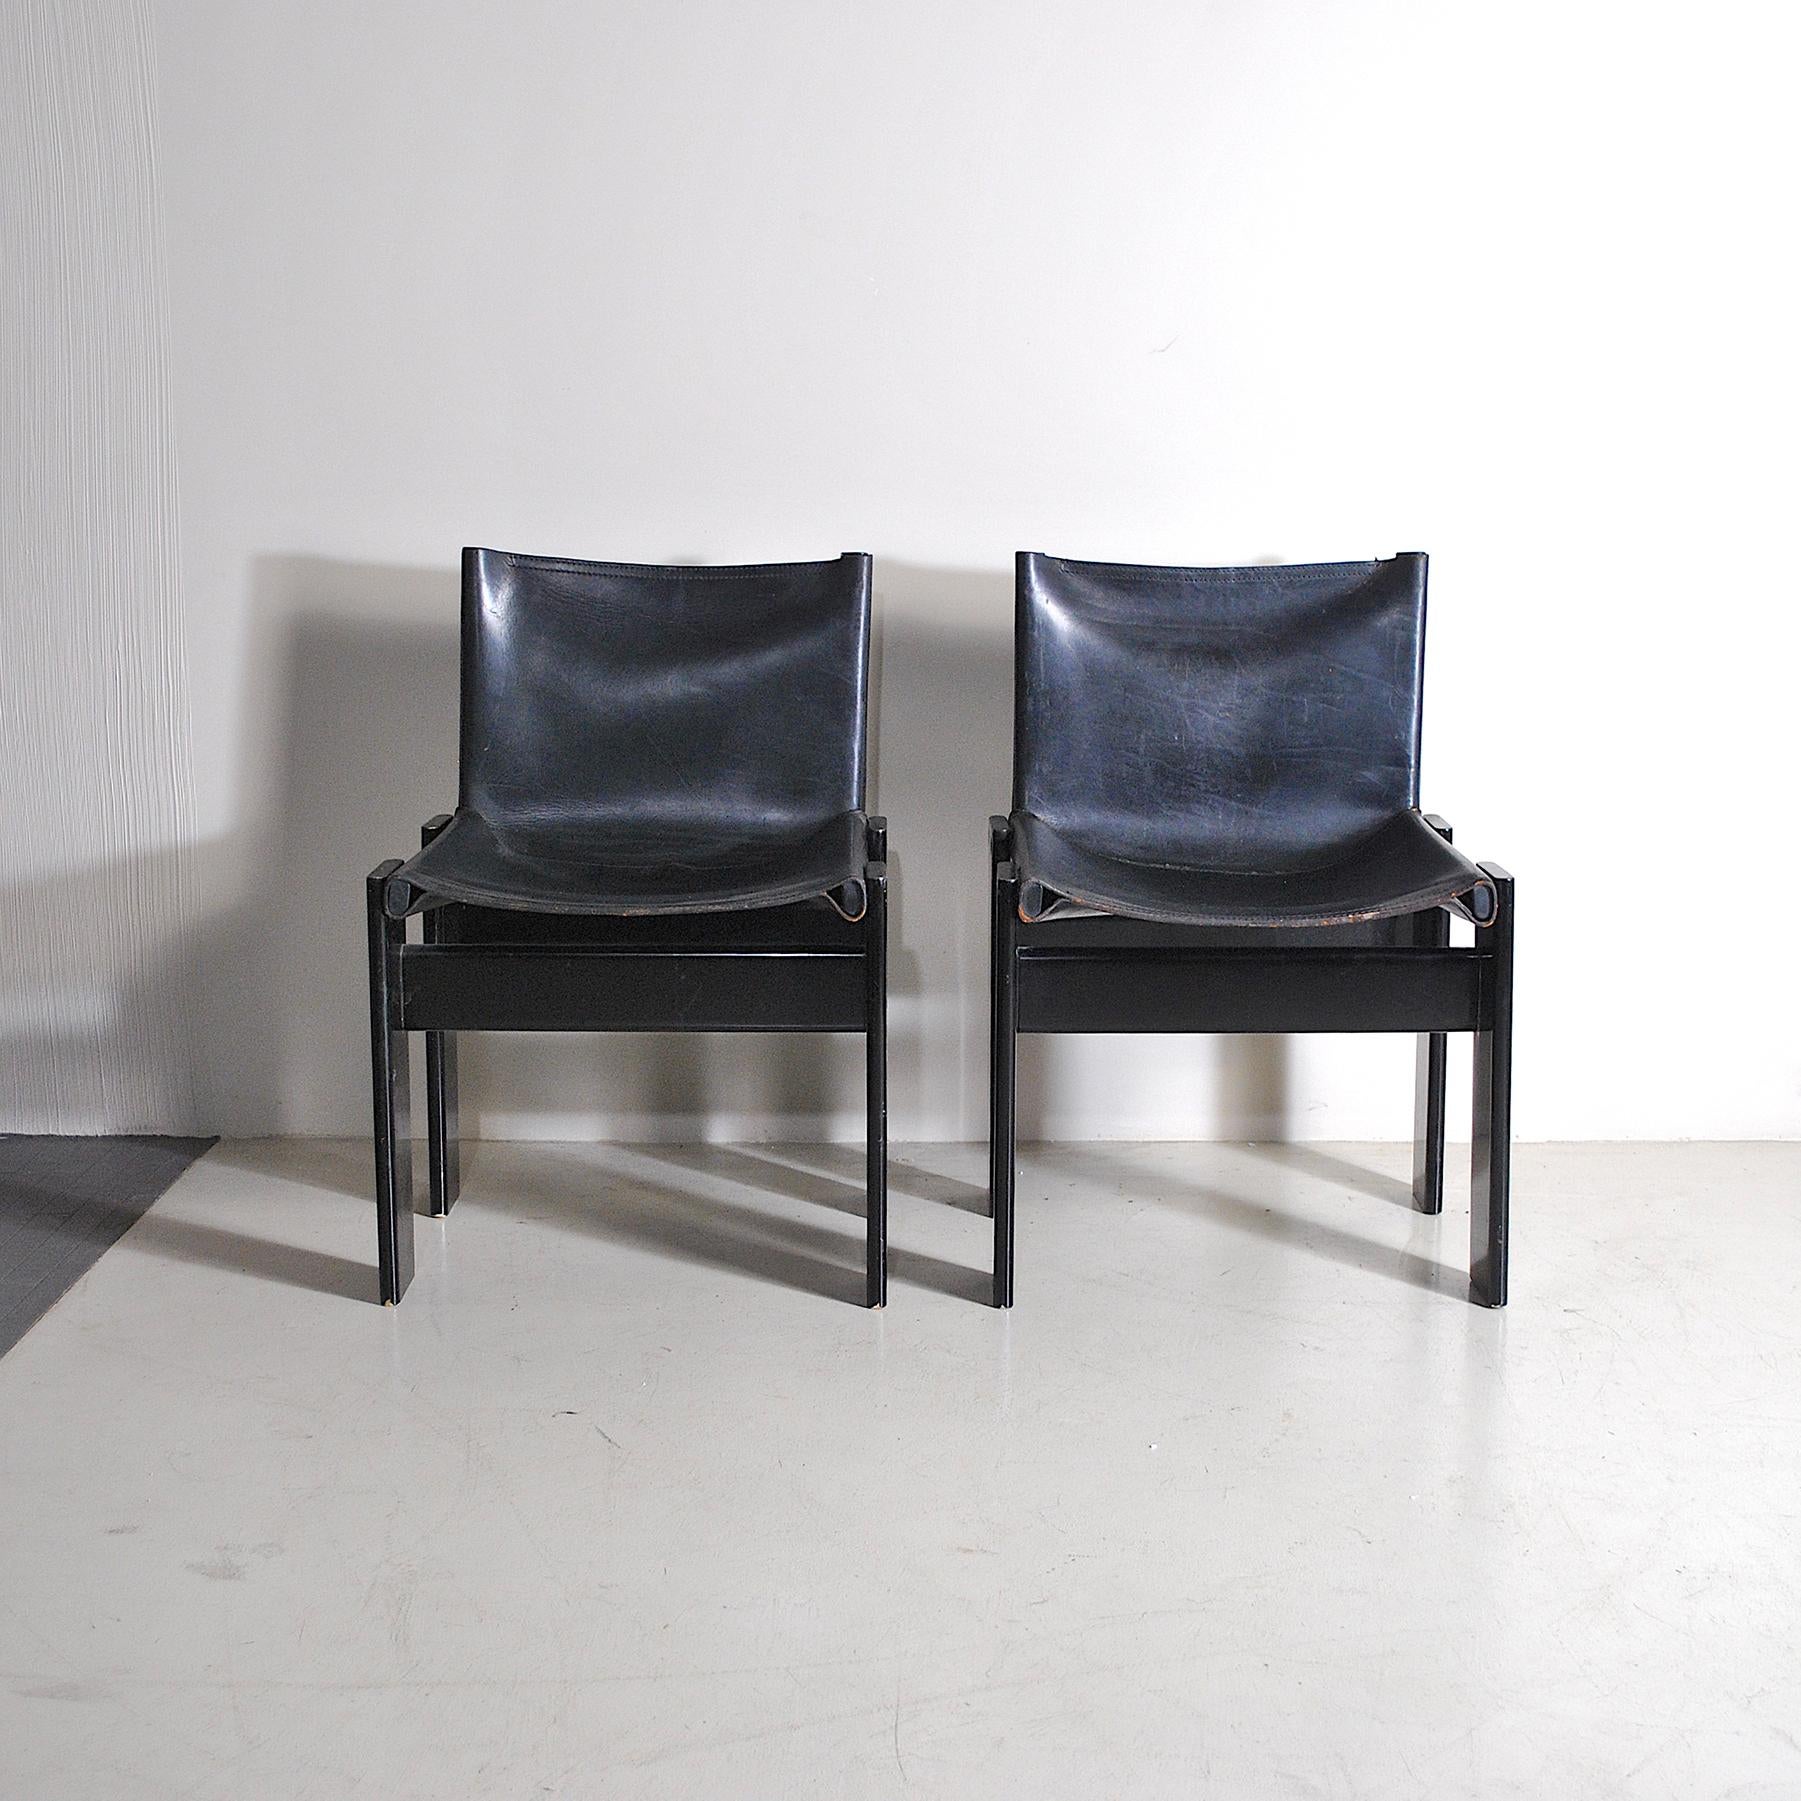 Pair of seats model Monk designer Afra & Tobia Scarpa for Molteni is made with walnut structure with black leather seat, normal signs of wear due to use and time.